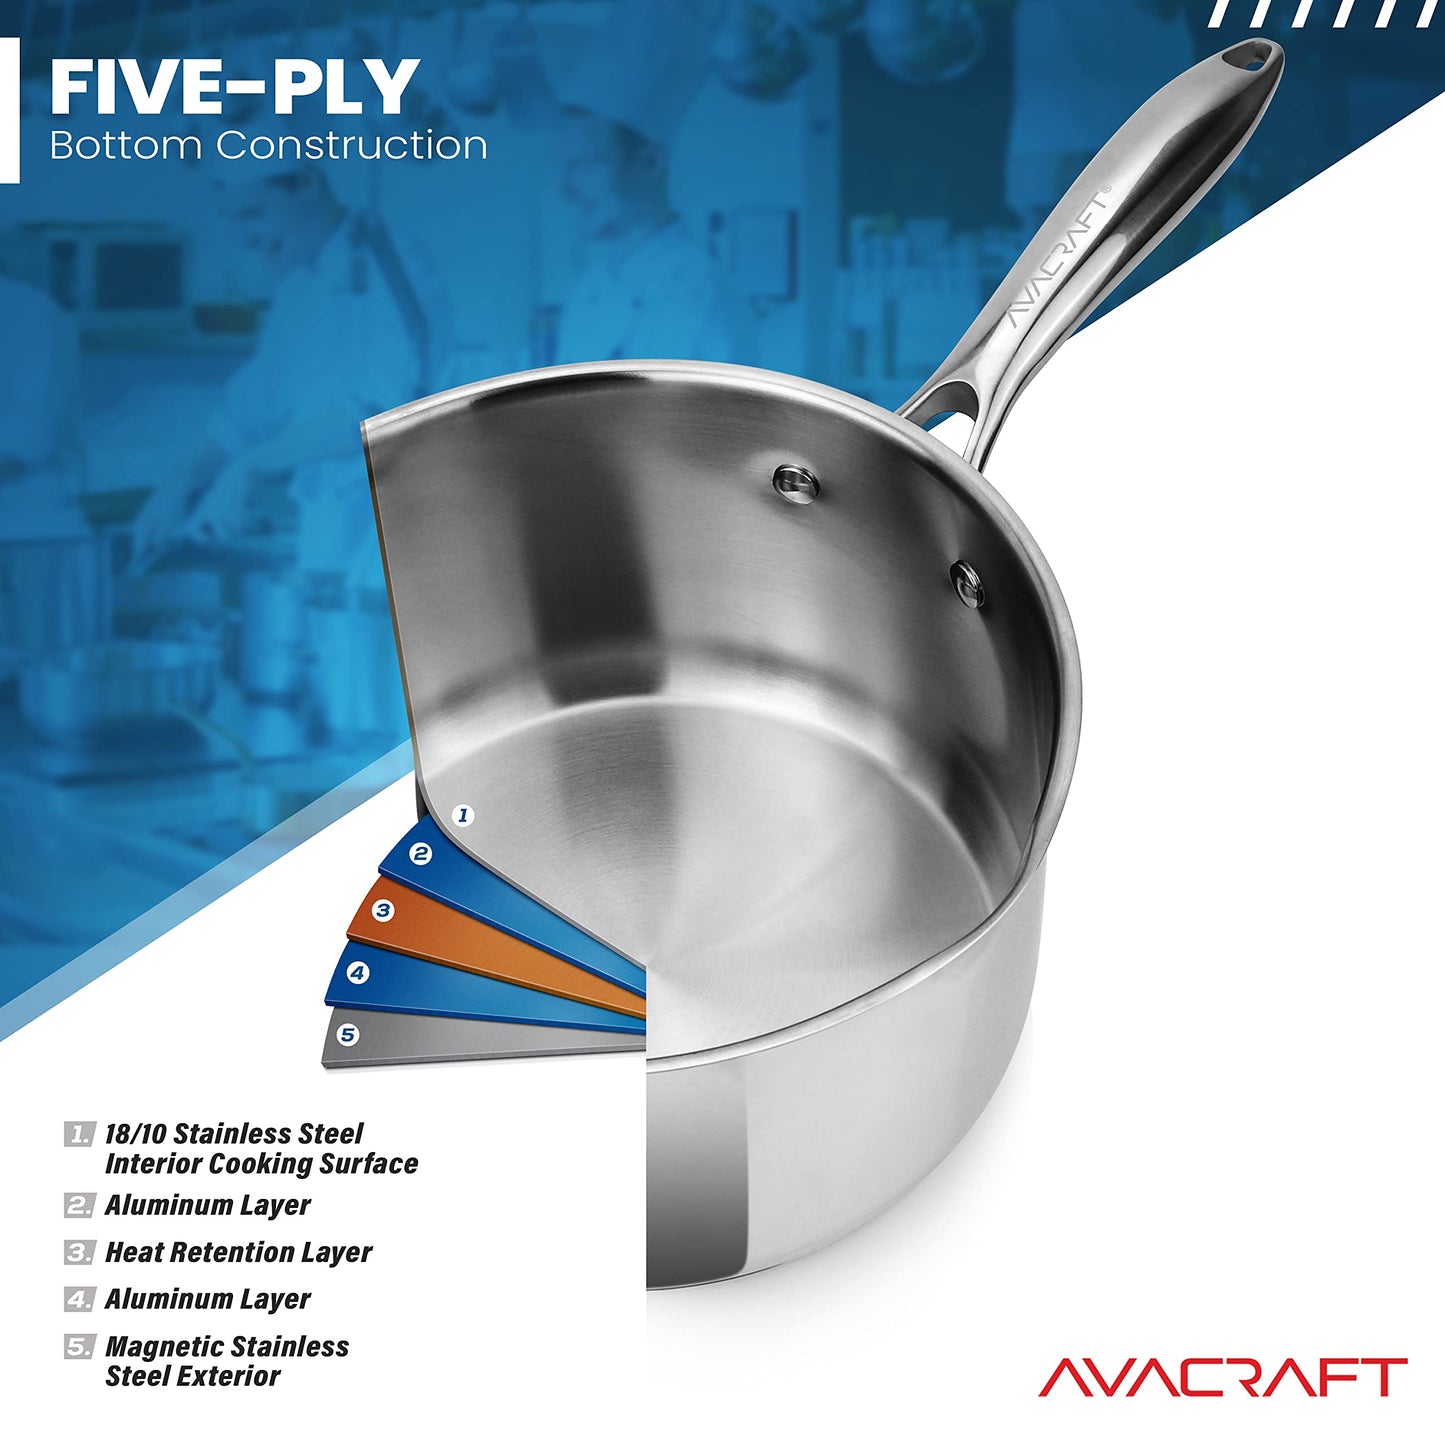 AVACRAFT Stainless Steel Saucepan with Glass Strainer Lid, Two Side Spouts for Easy Pour with Ergonomic Handle, Multipurpose Sauce Pot (Tri-Ply Capsule Bottom, 2.5 Quart)